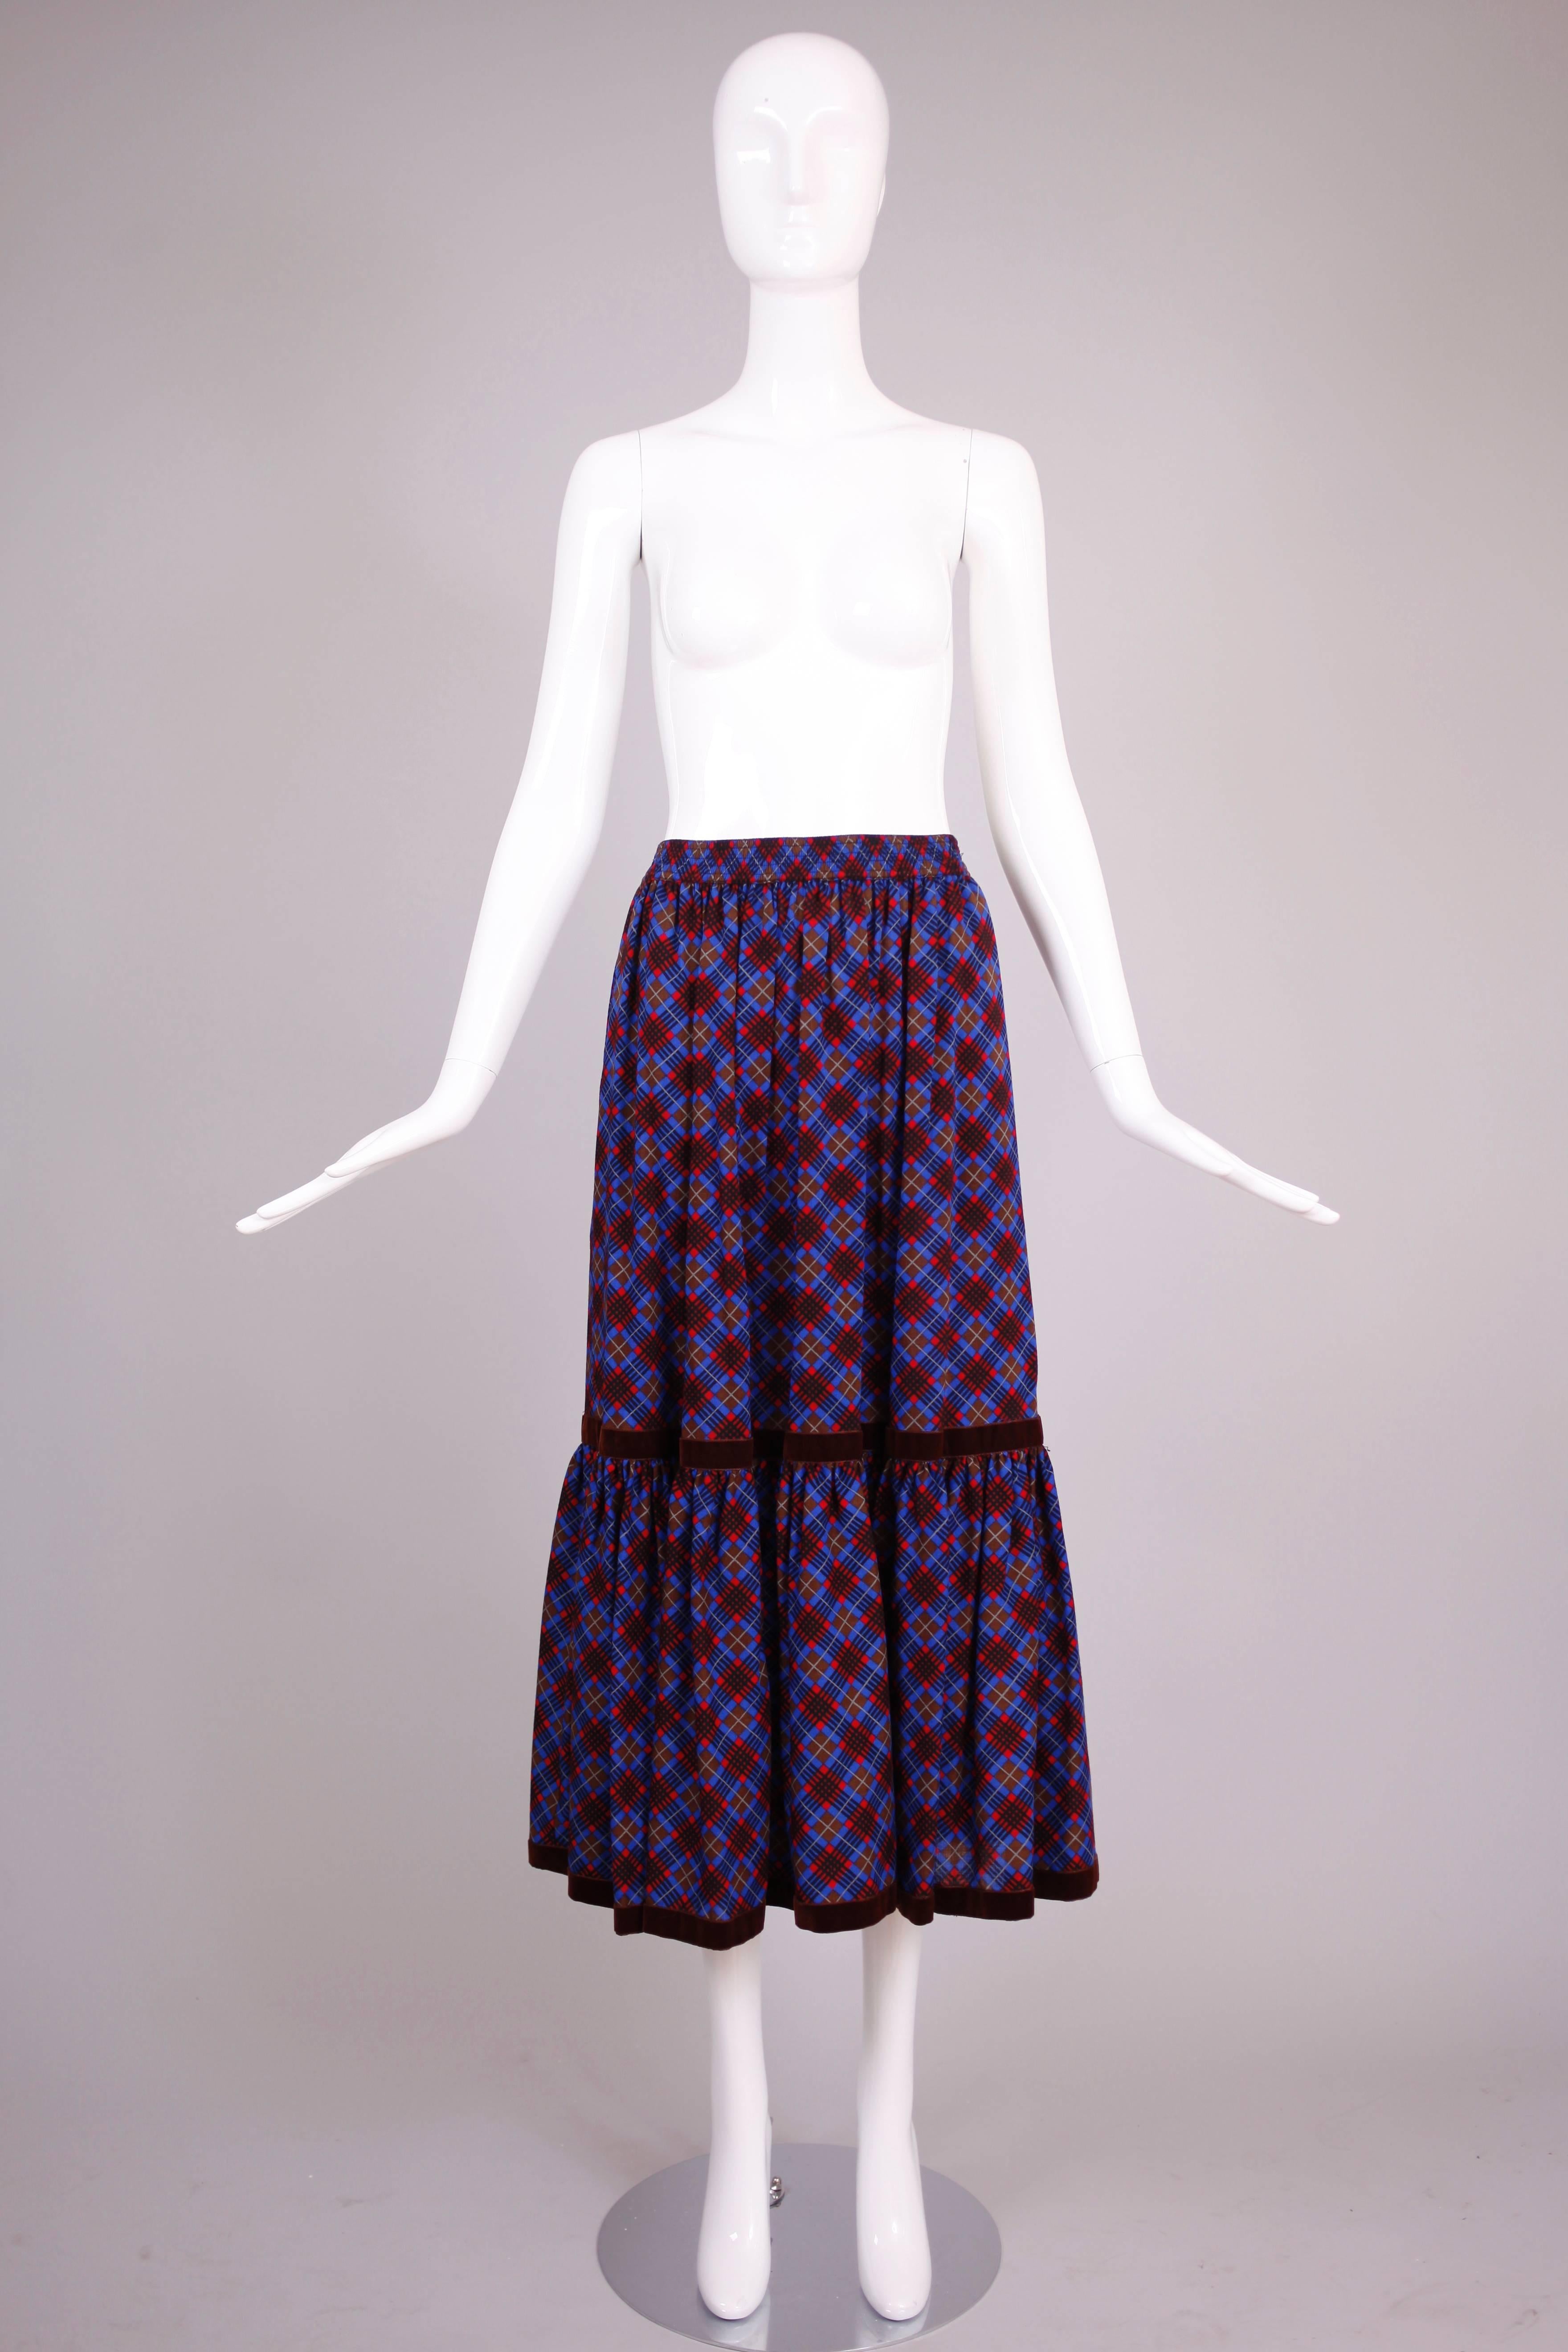 1970's Yves Saint Laurent plaid tiered lightweight wool prairie skirt with brown velvet trim. In excellent condition. Size tag 38.
MEASUREMENTS:
Waist - (approx.) 26